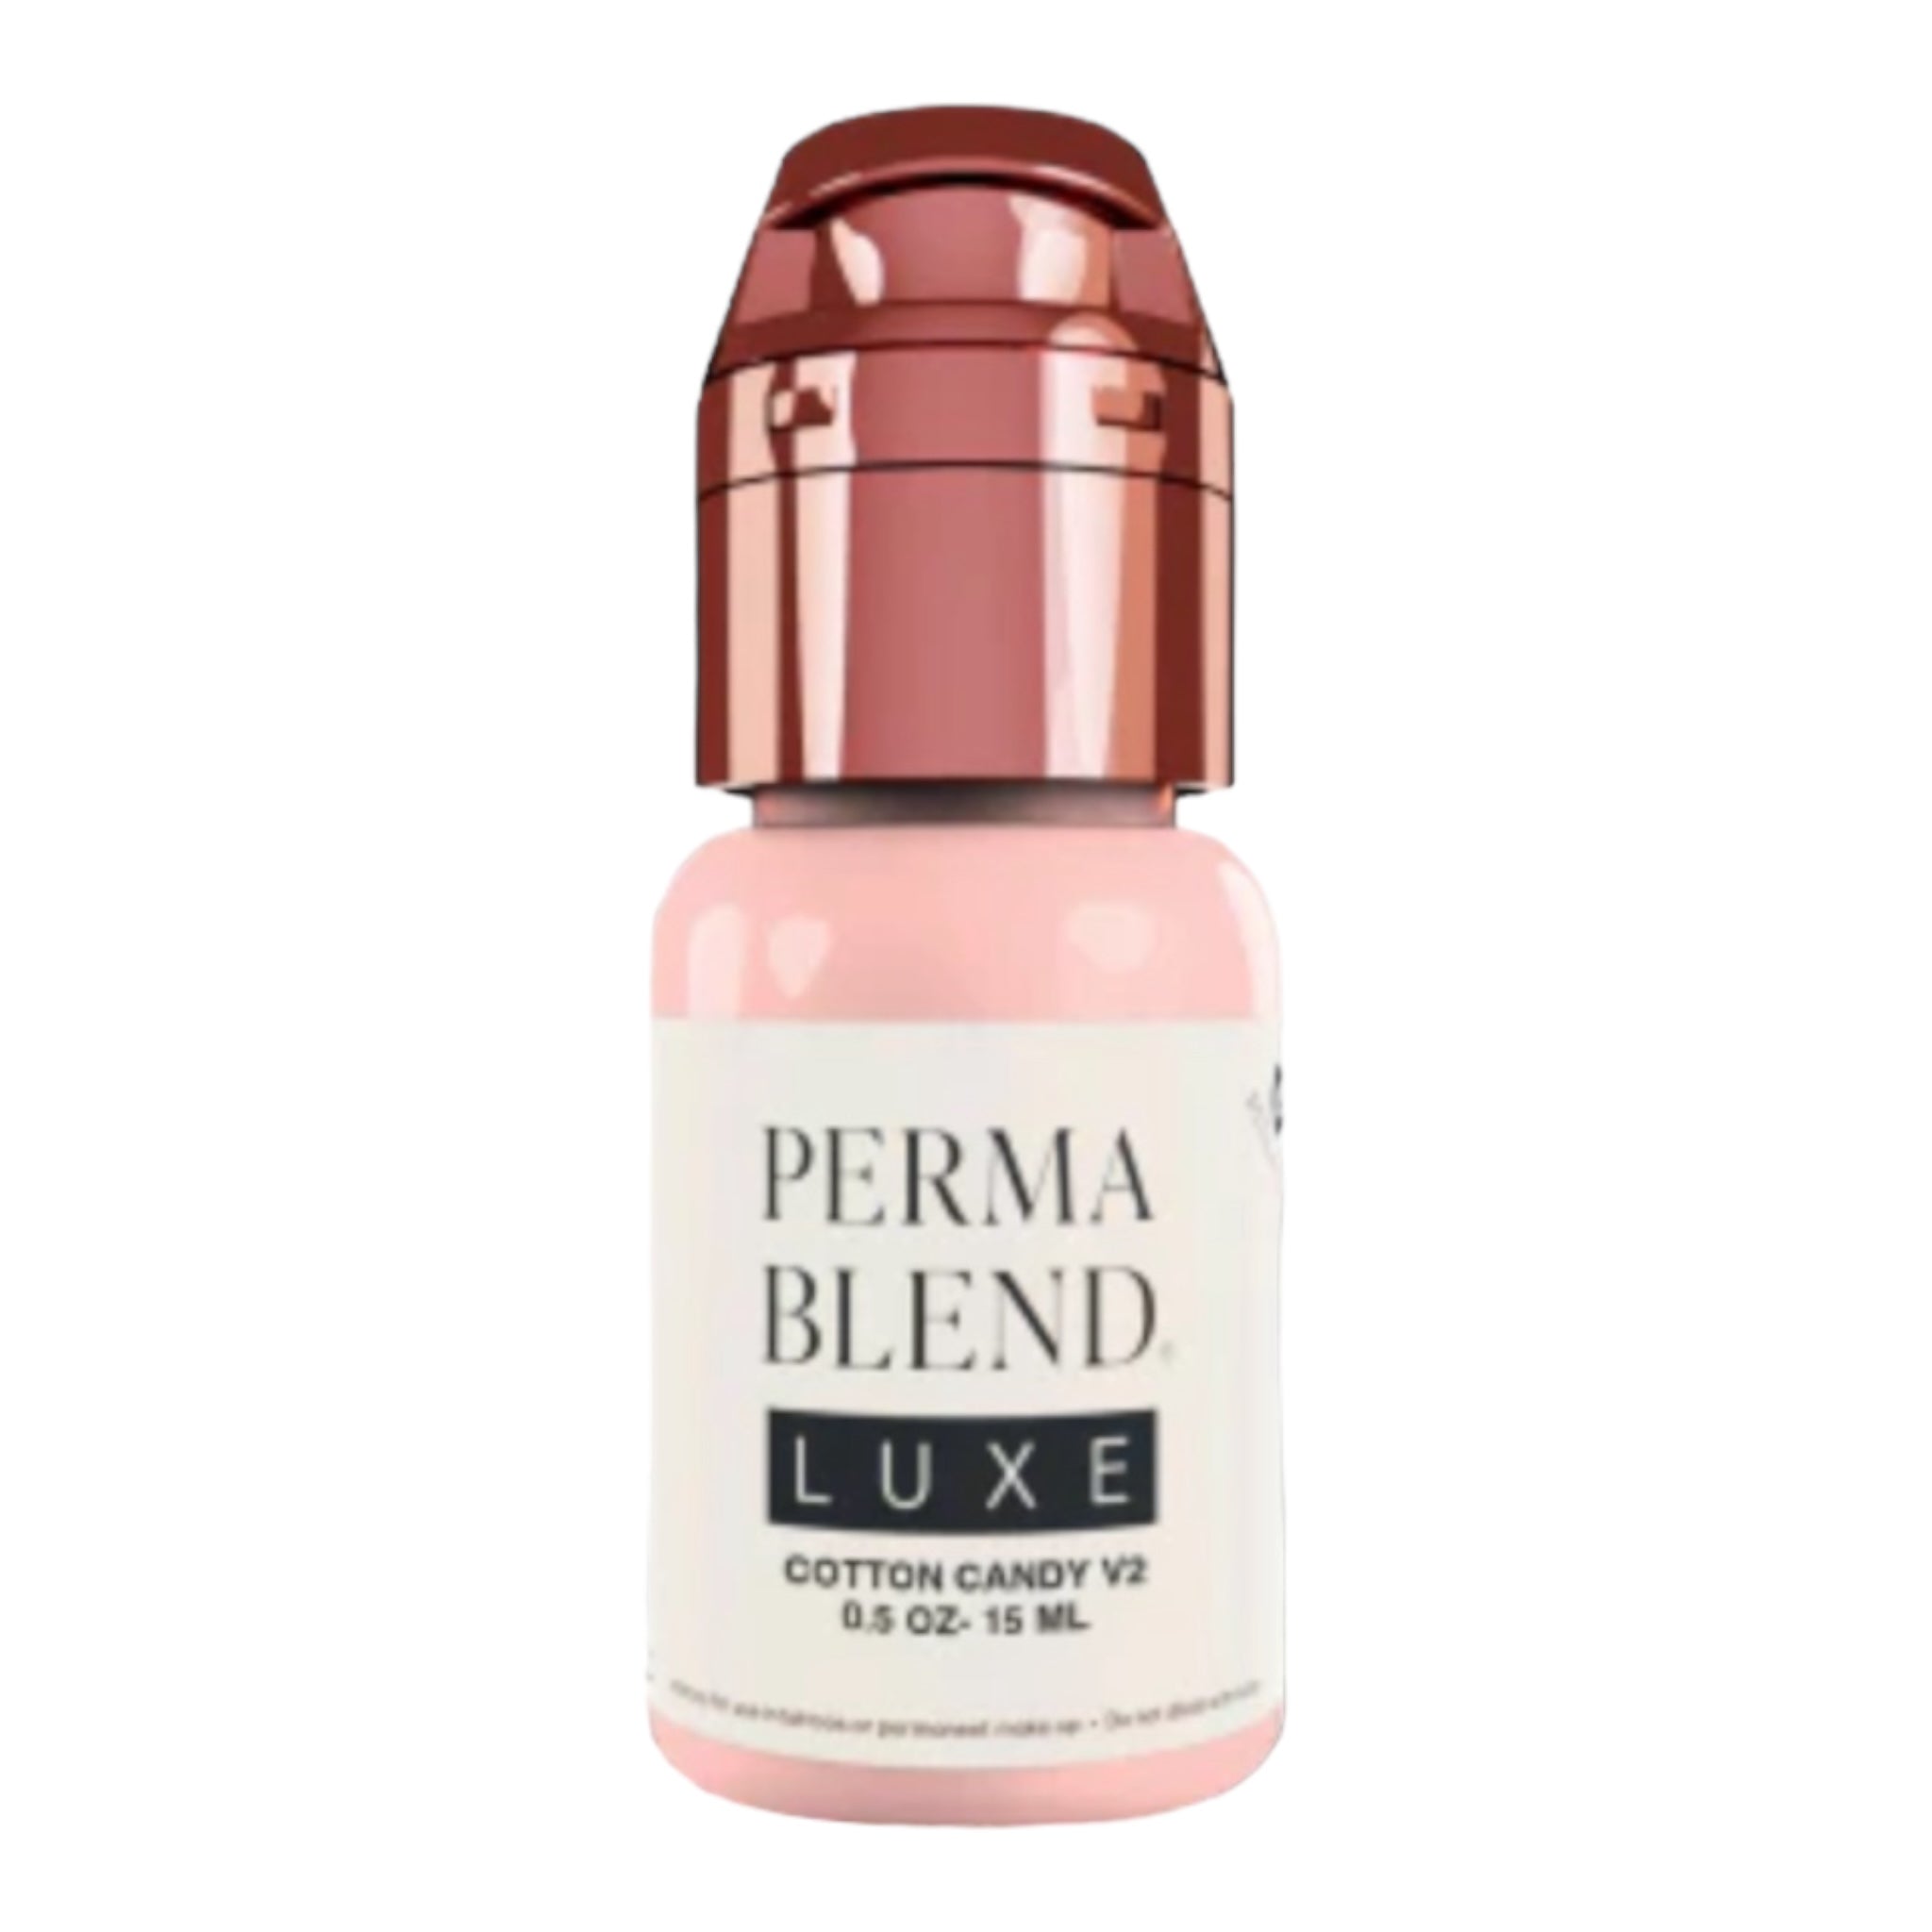 Encre Maquillage Perma Blend Luxe 15ml - Cotton Candy V2